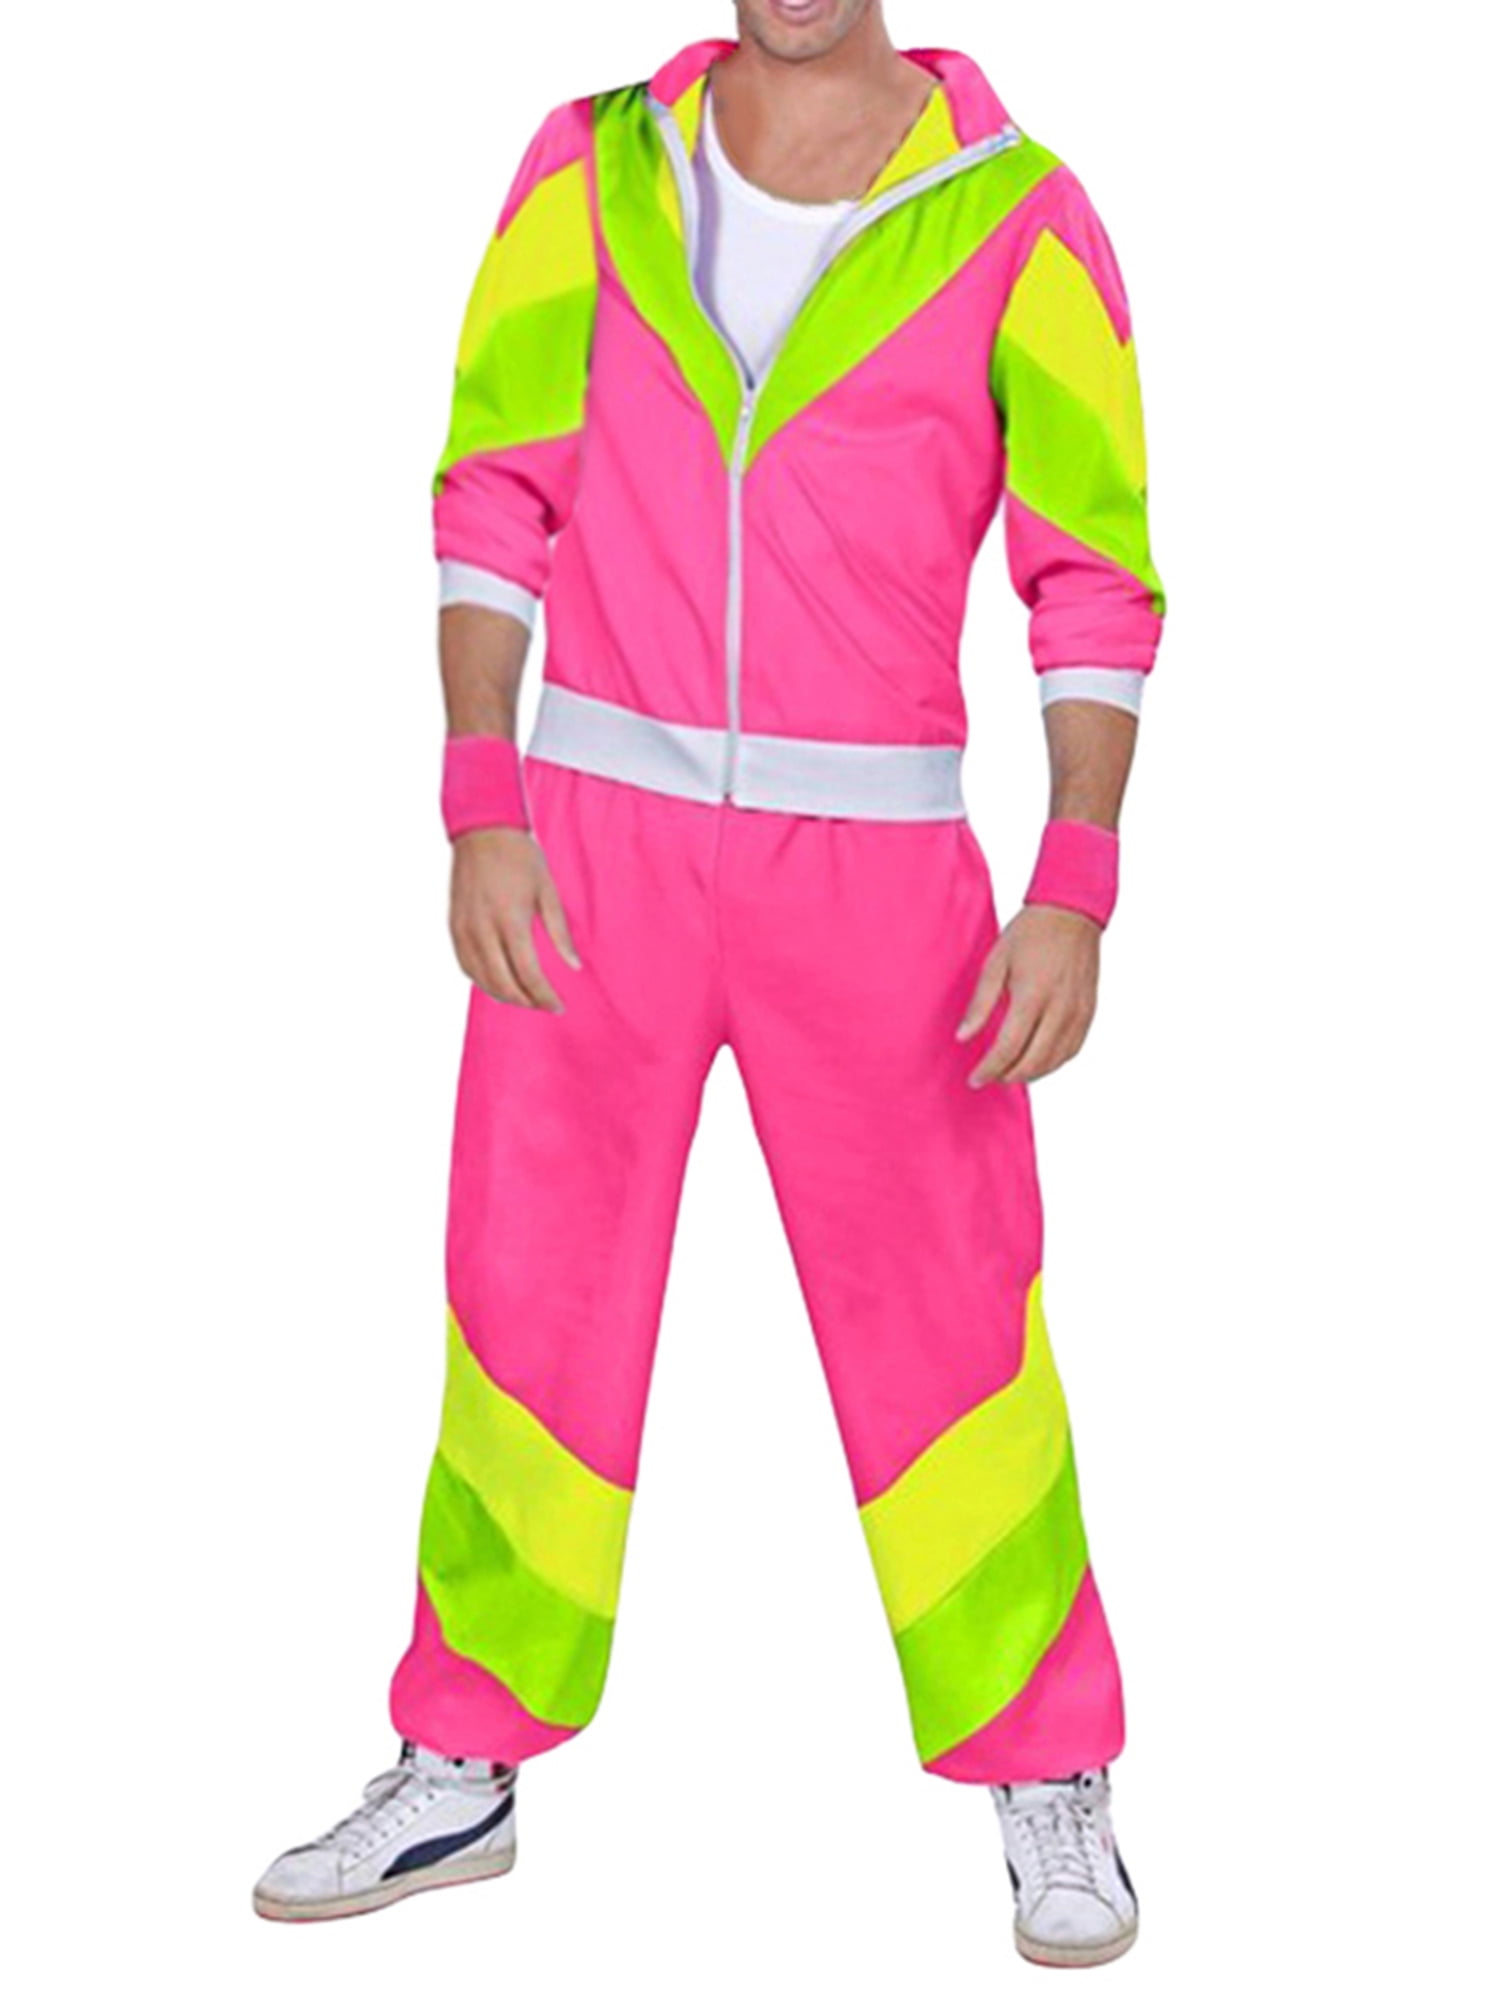 Stylish 80's Shell Suit – Masquerade Costume Hire